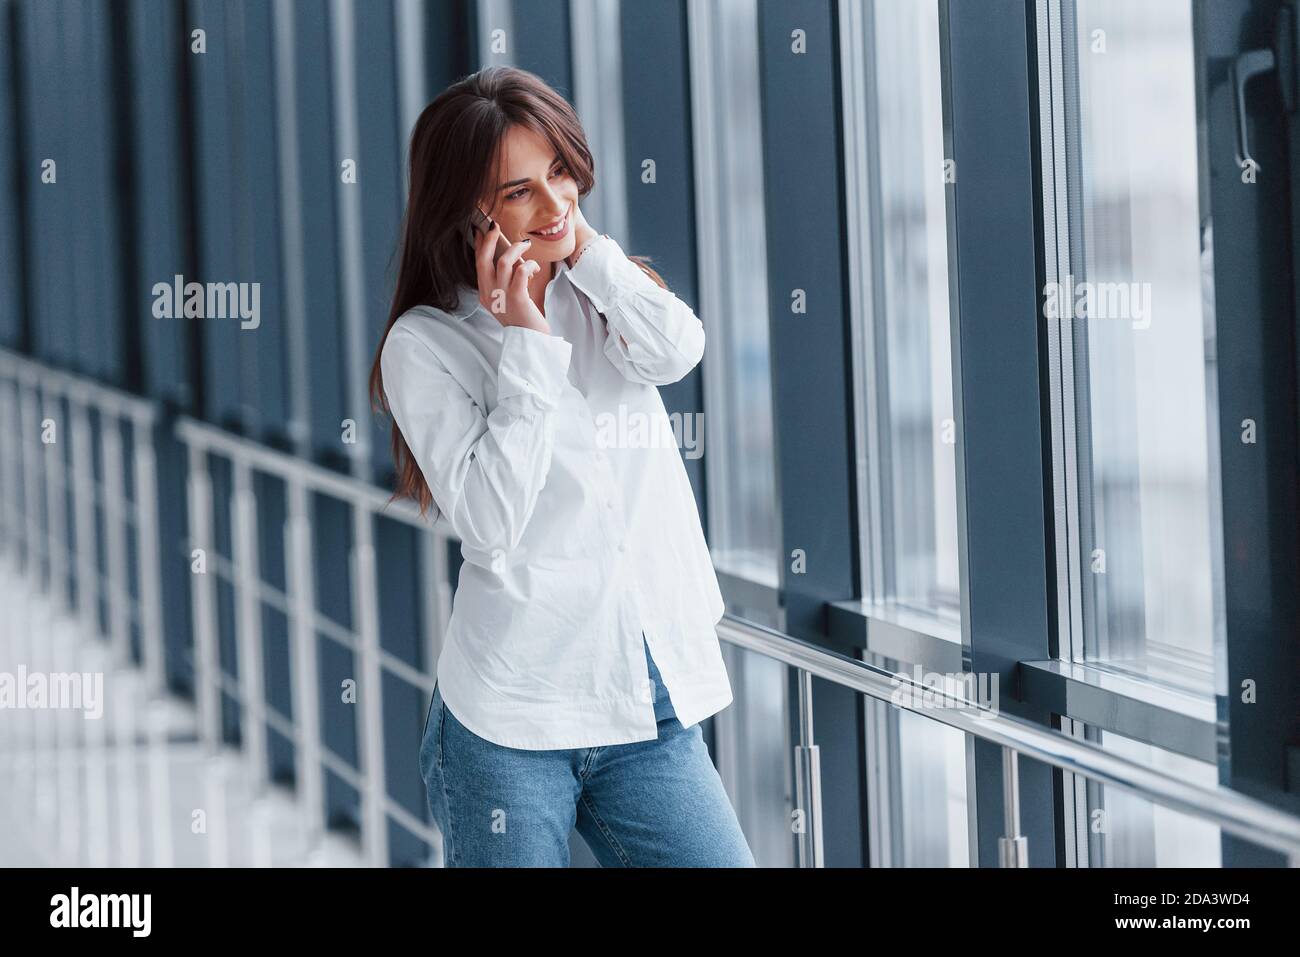 Brunette in white shirt indoors talking by phone in modern airport or hallway at daytime Stock Photo